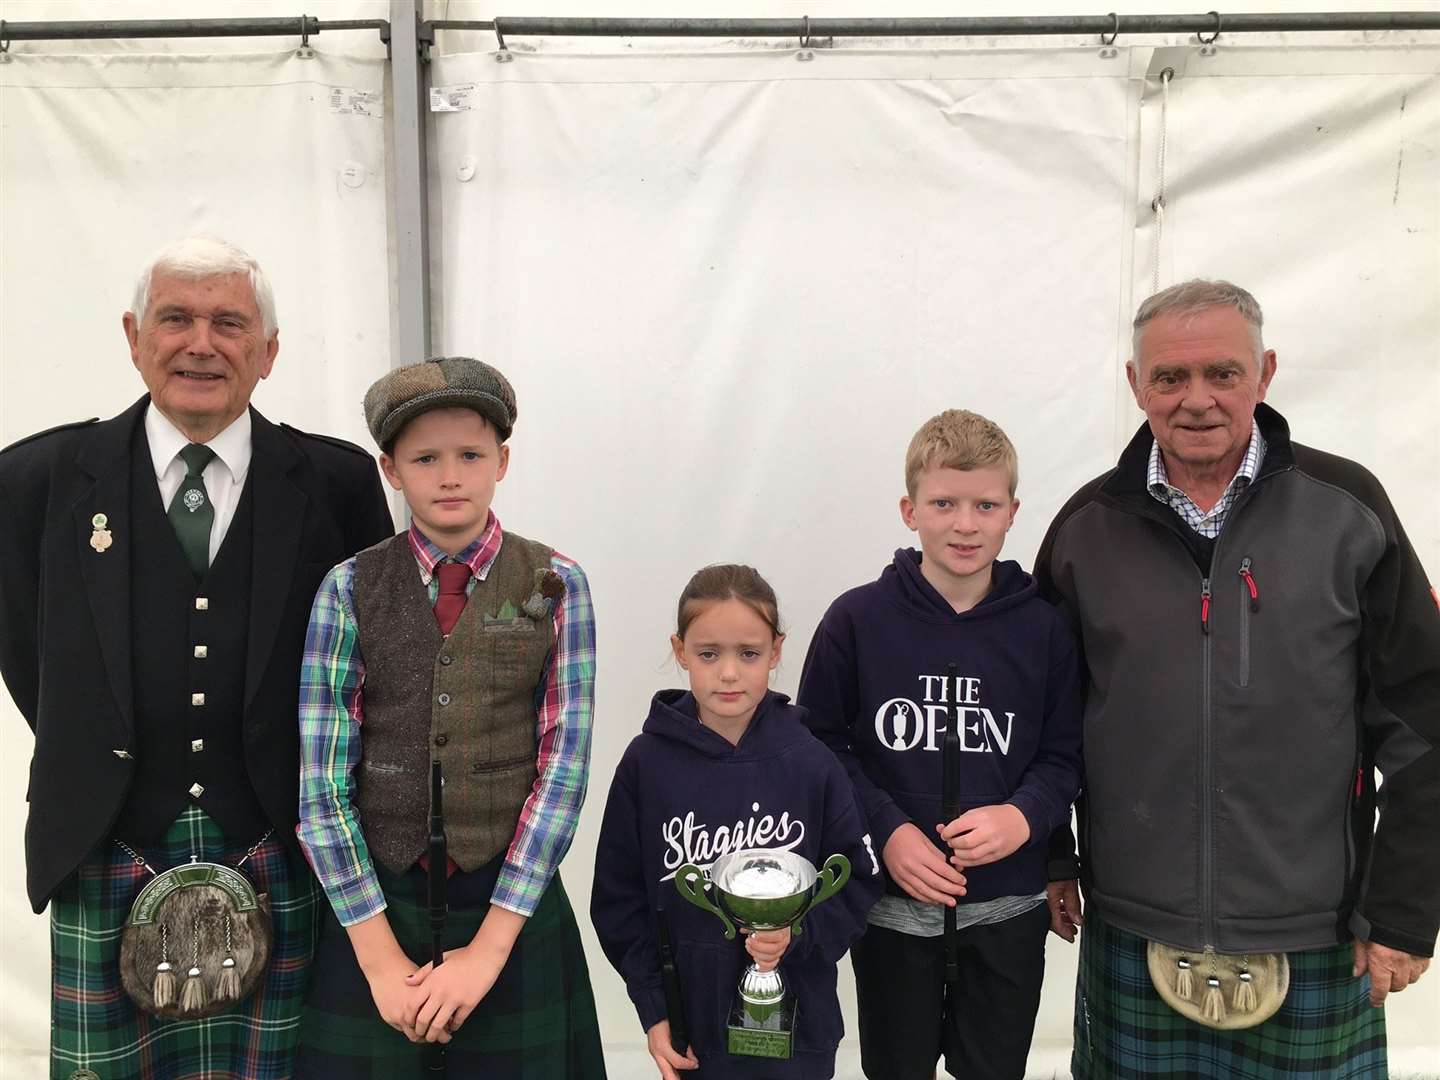 Young Ruby Stevenson, Invershin, won the primary school chanter competition. Flanking Ruby are Lyster Price-Davis (left) and Toby Dingwall who came second equal. Judge Charlie Ross stands far left and judge Graham Grant far right.